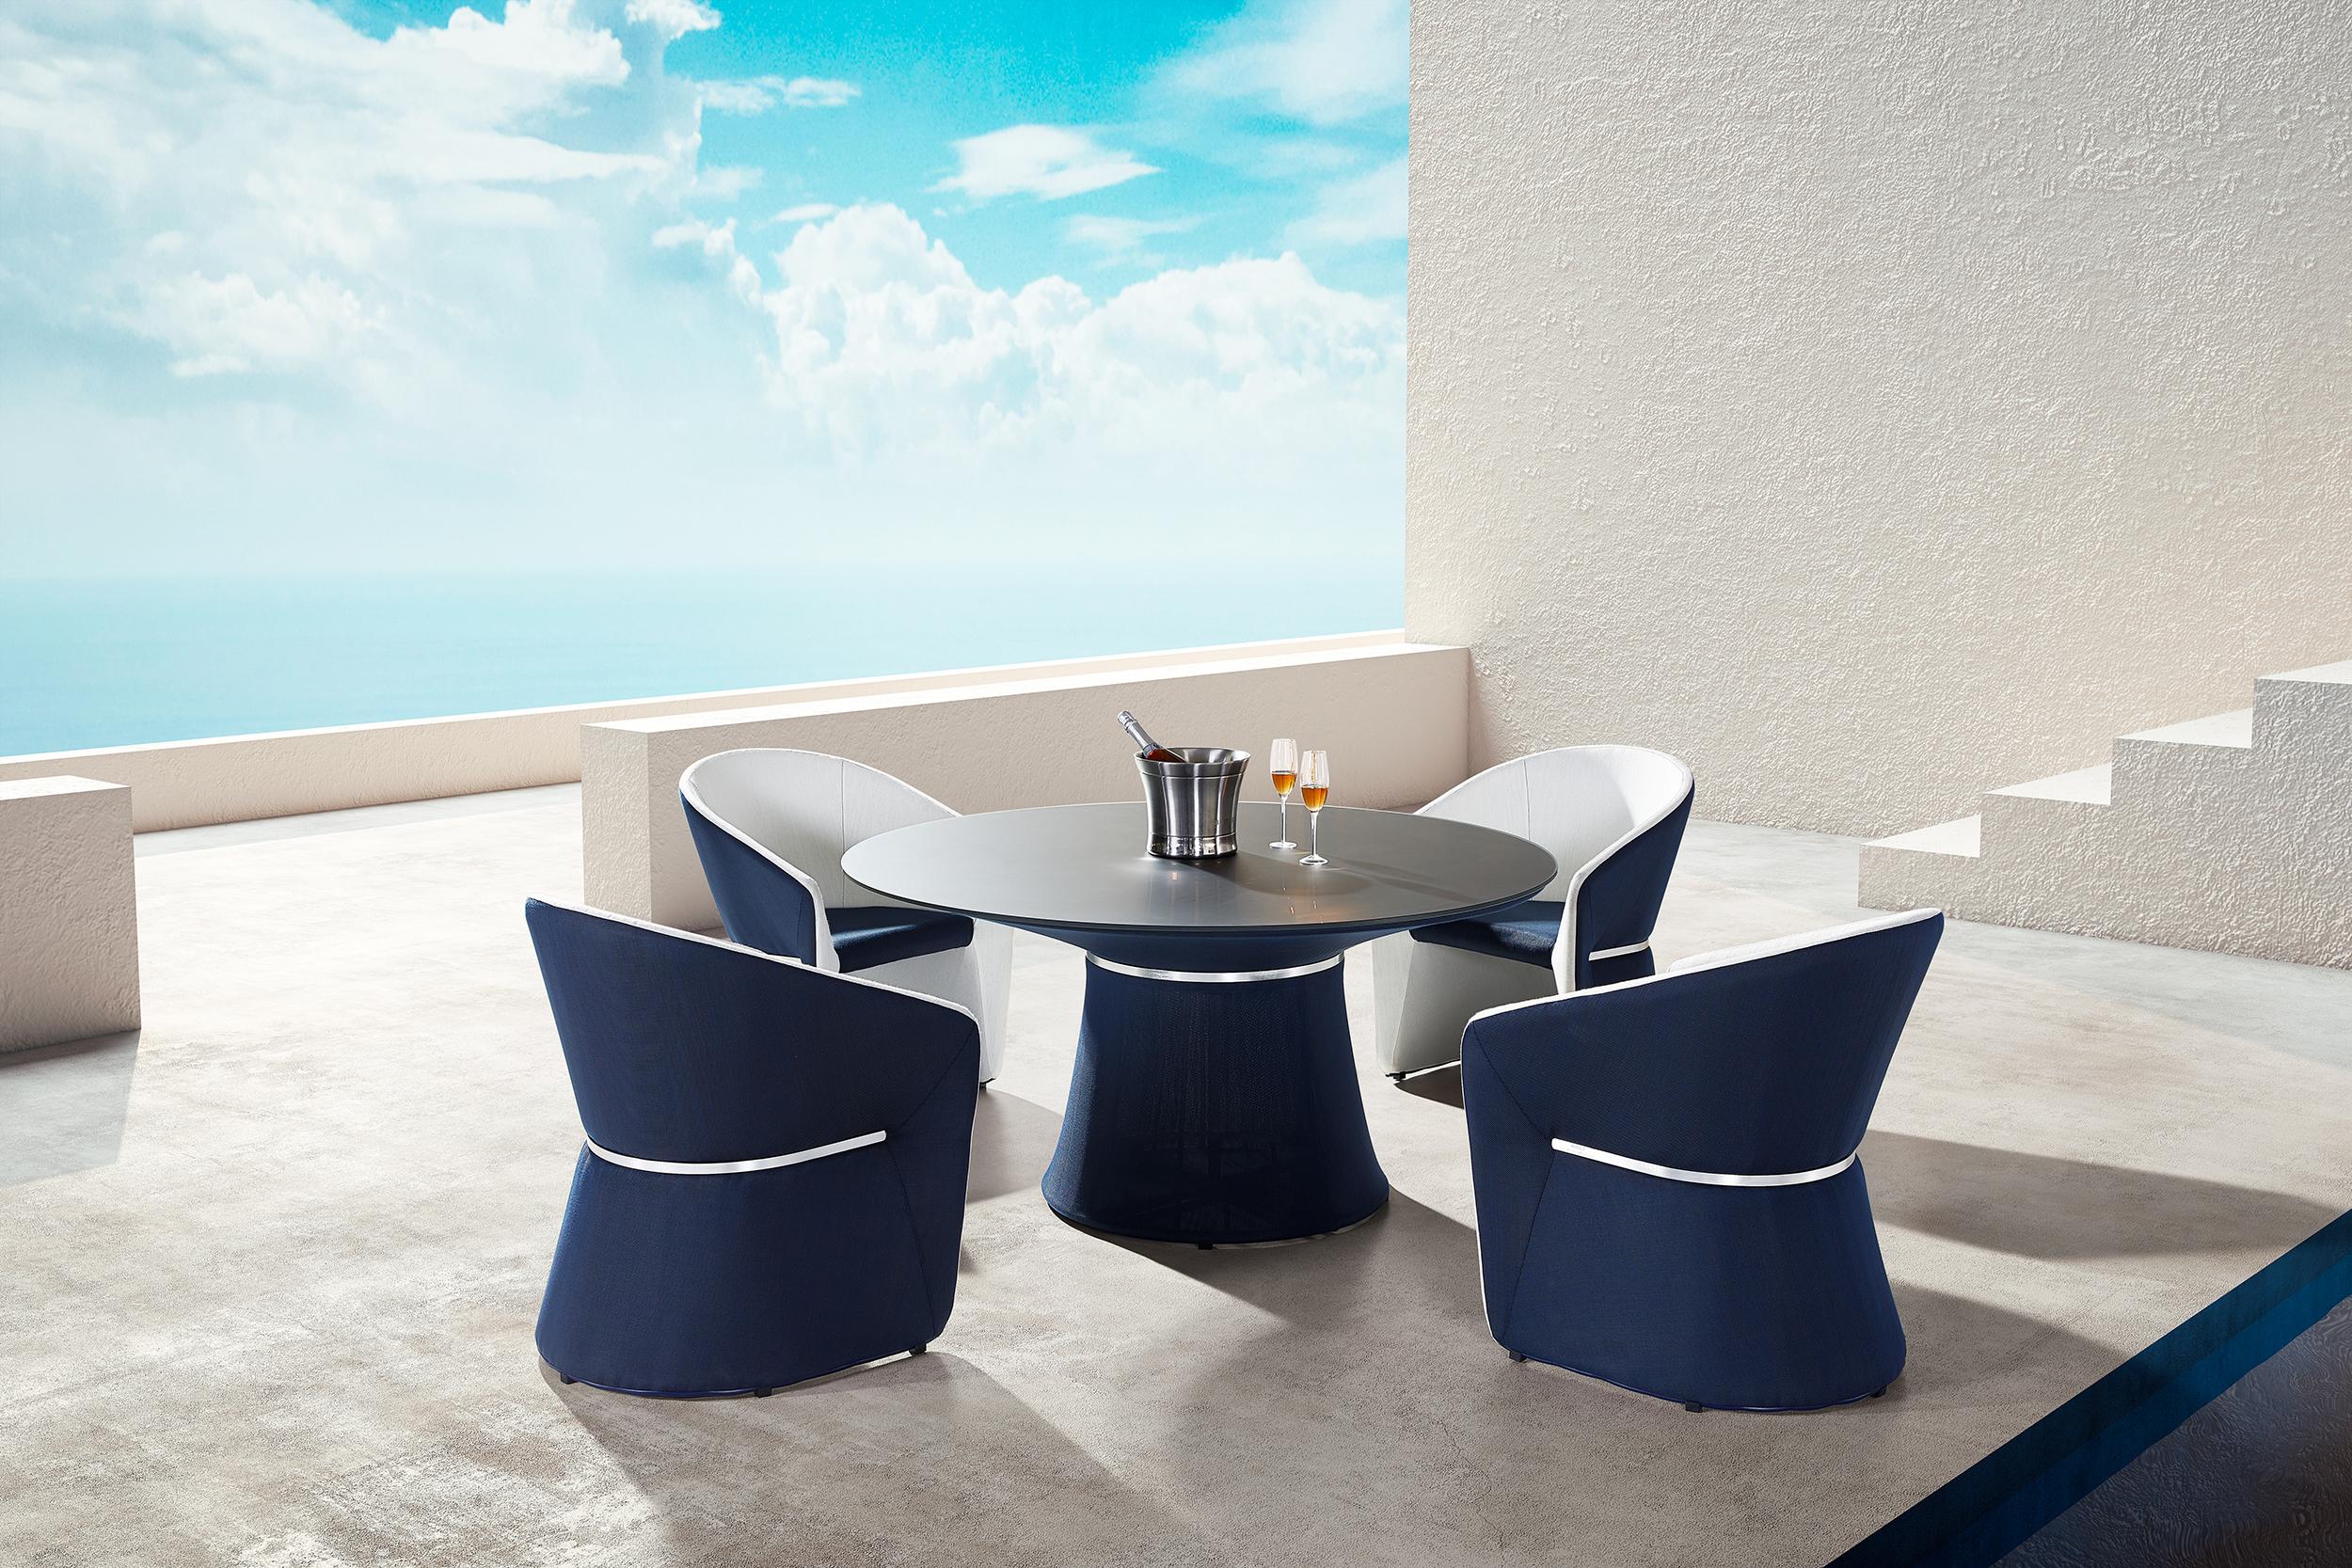 Outdoor collection designed by Pininfarina. 
Materials: Aluminum frame. Polyester mesh fabric 
Dimensions: 68,5 x 67 x h 83,5 cm

The design concept behind this collection is that of wanting to merge lightness, but at the same time sturdiness and